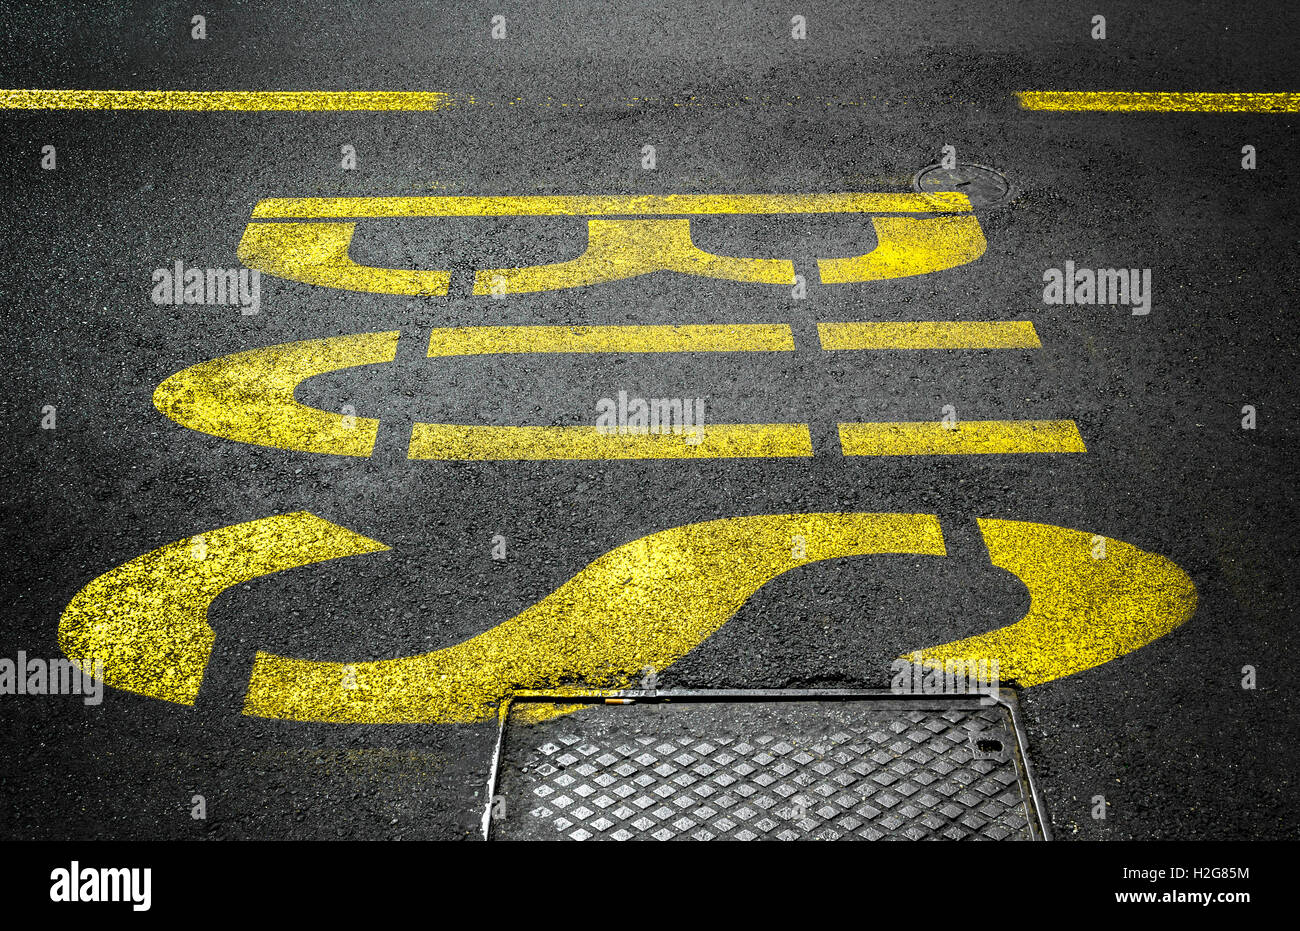 Yellow bus traffic sign painted on asphalt road. Stock Photo